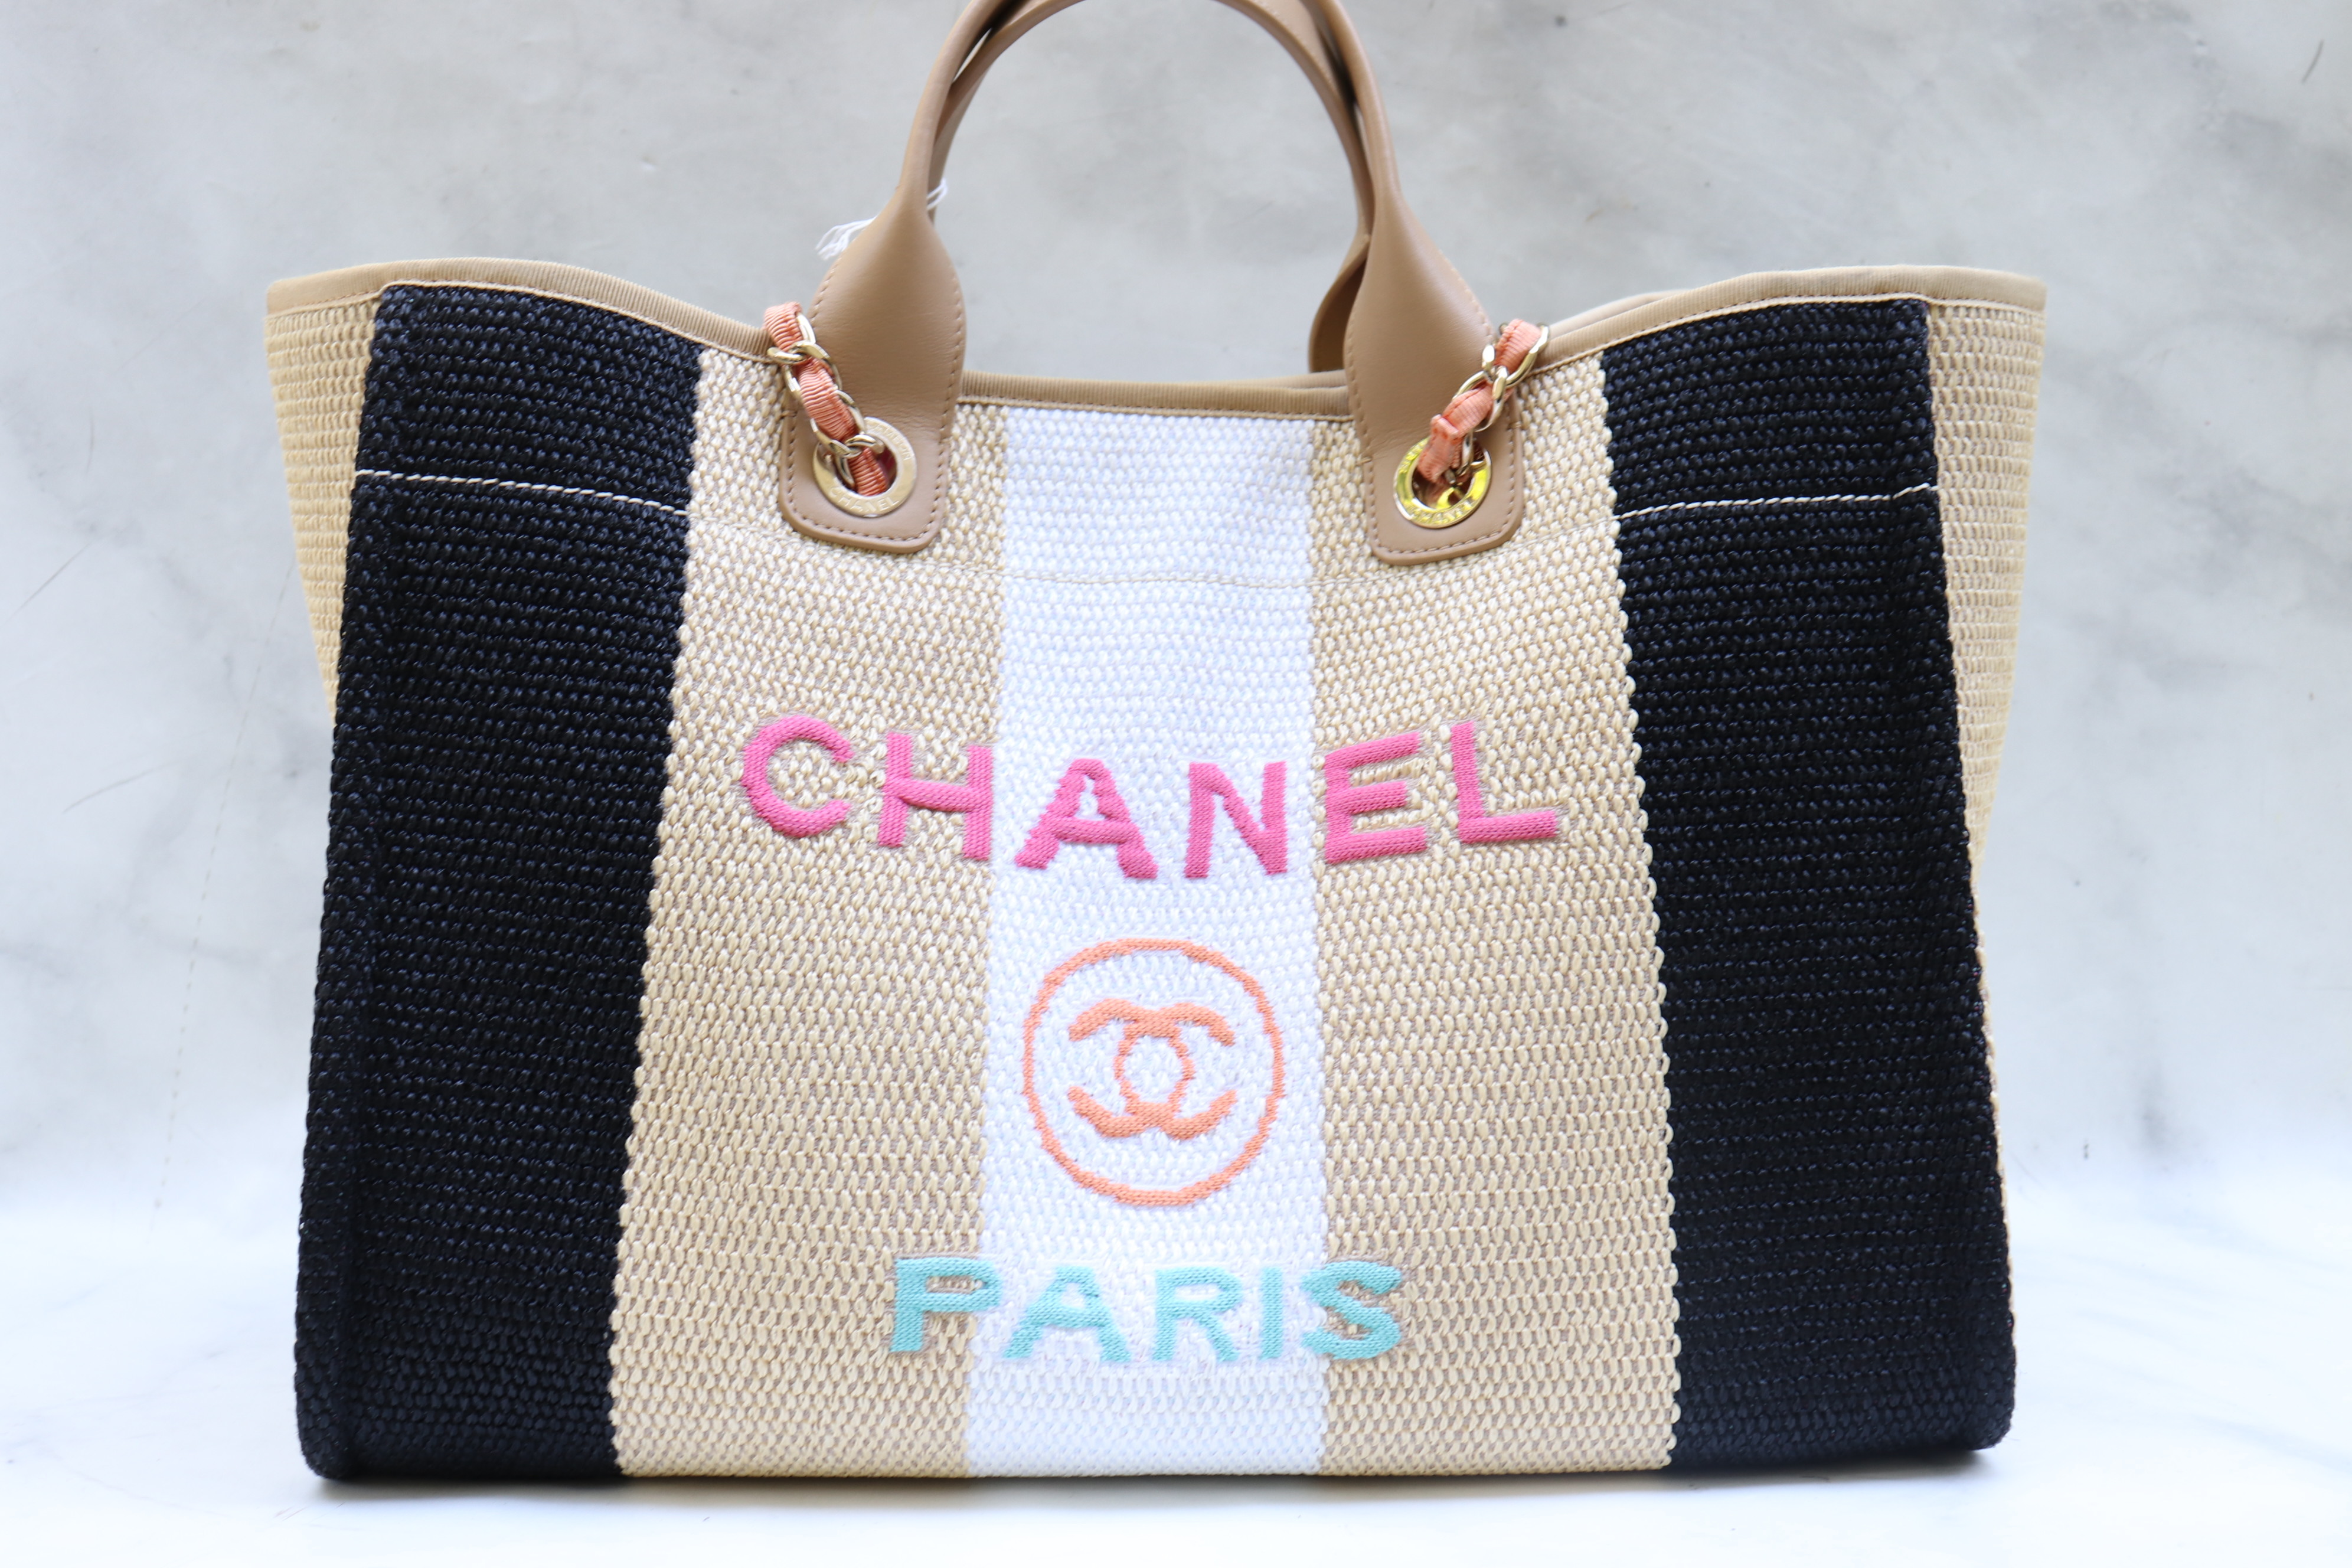 Chanel Deauville X Large, Green Canvas with Silver Hardware, New in Dustbag  WA001